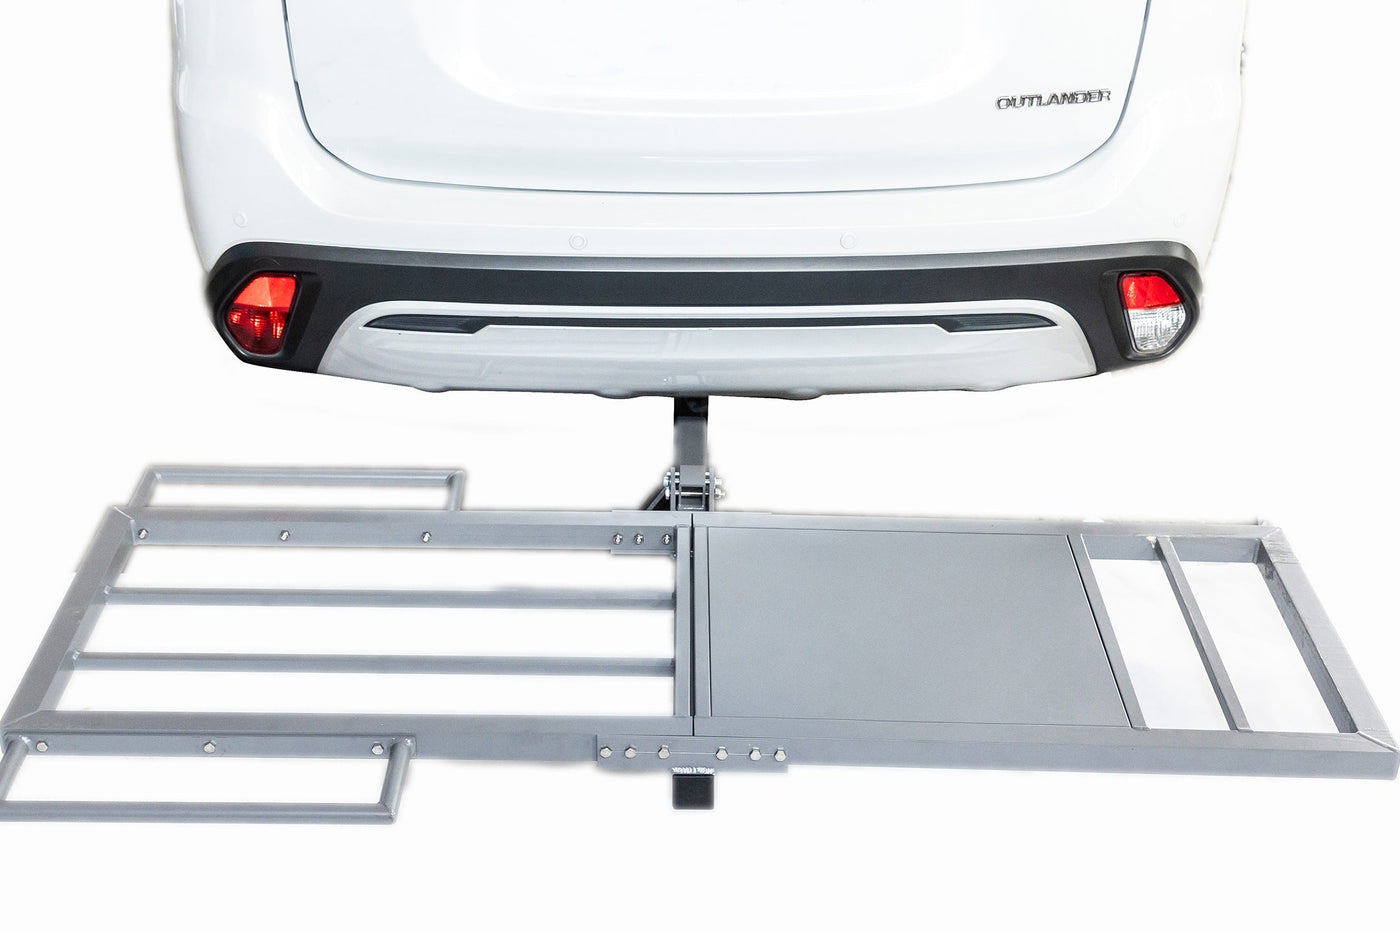 Hitch Rack - Exclusive Offer